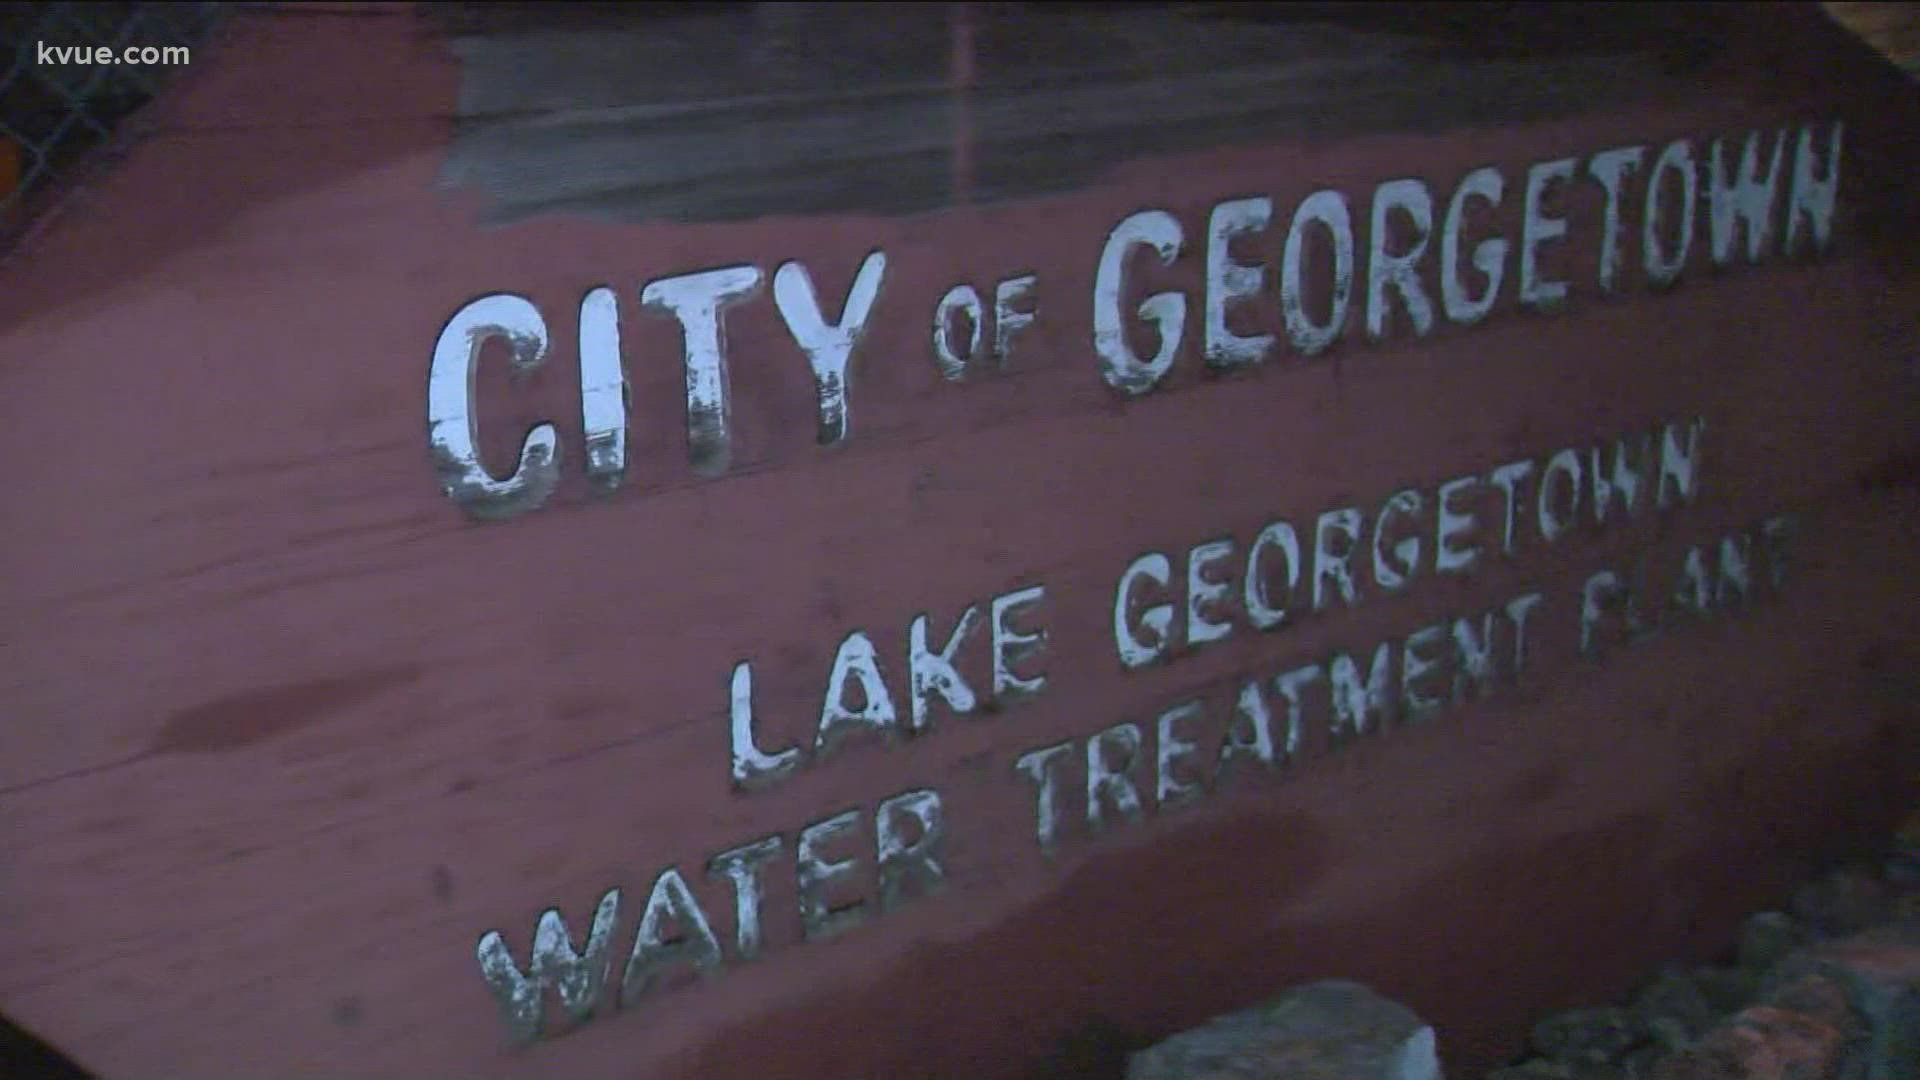 On Monday night, Georgetown officials issued an emergency water conservation notice after an issue at the City's largest water treatment plant.